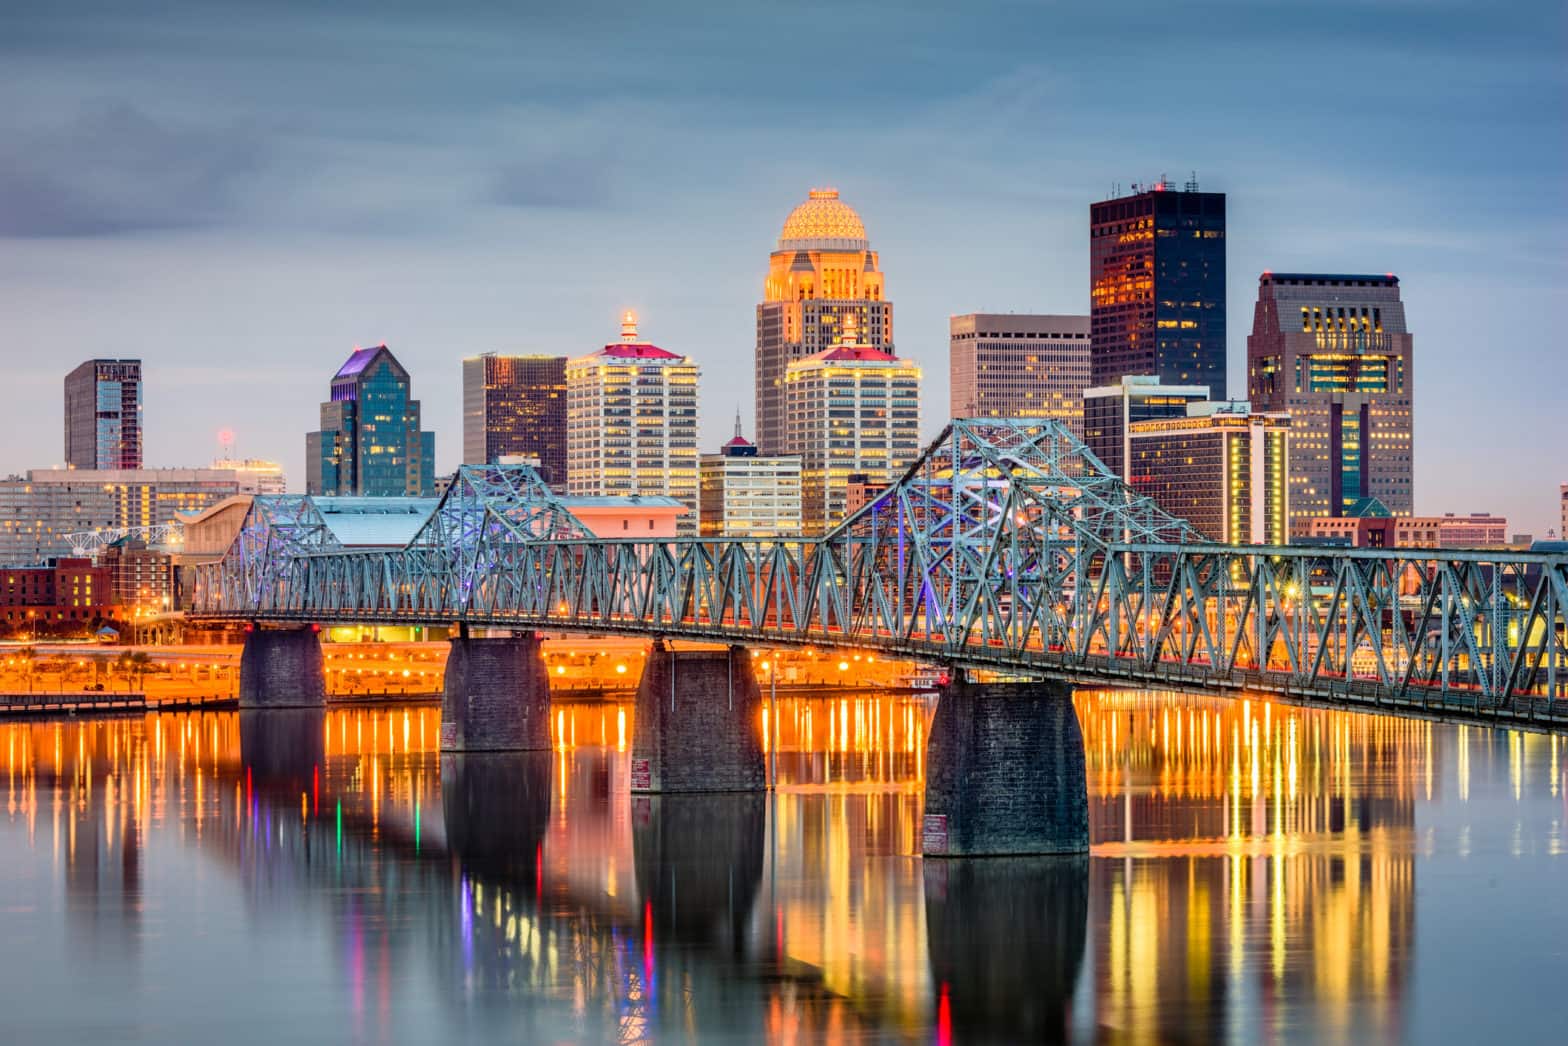 The Louisville, Kentucky skyline seen at dusk with the river and bridge in the foreground